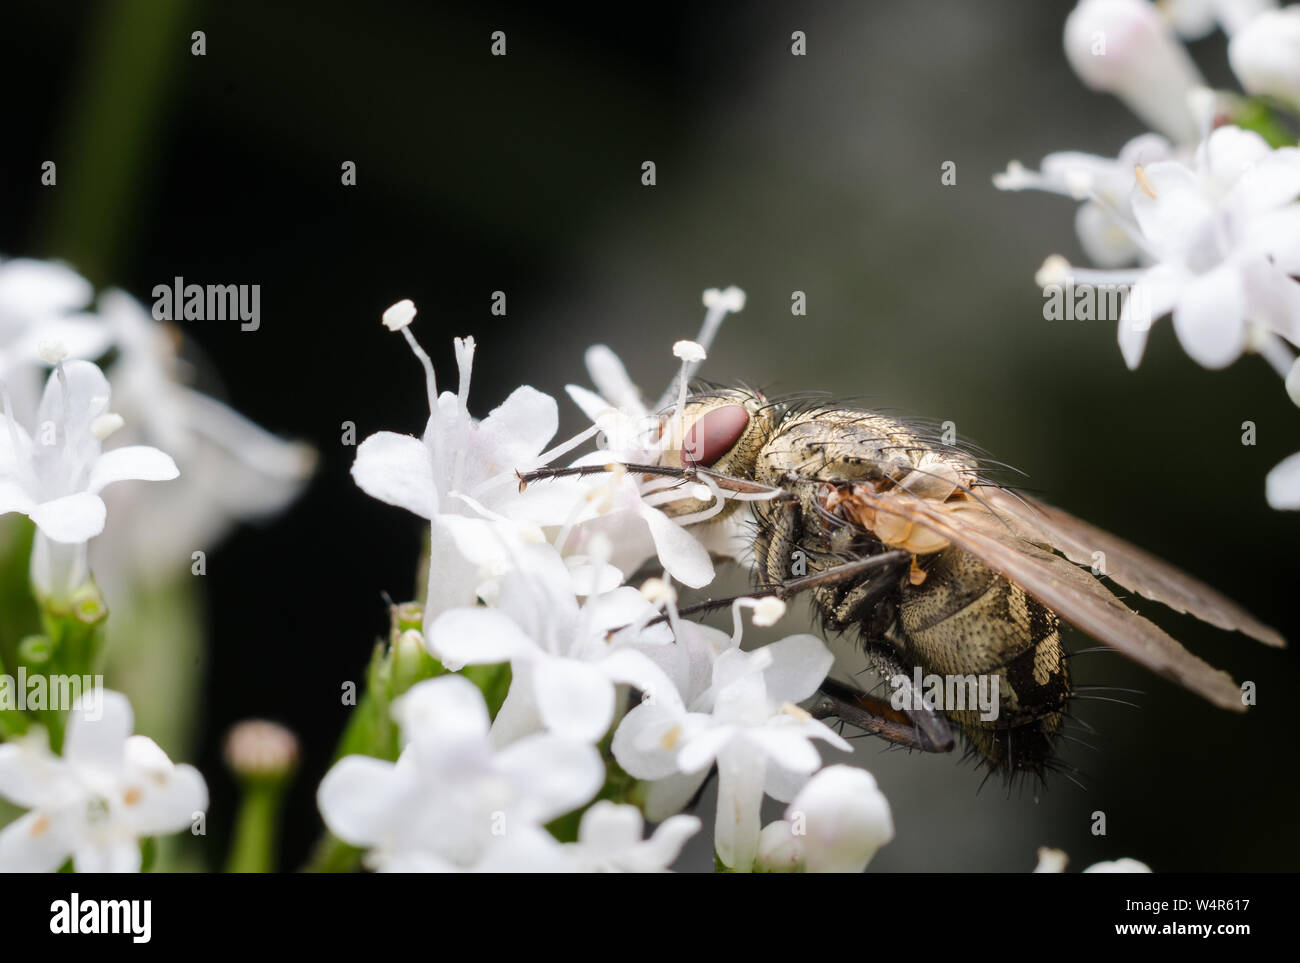 Coenosia, Musca domestica, Macro of a fly on a flower Stock Photo